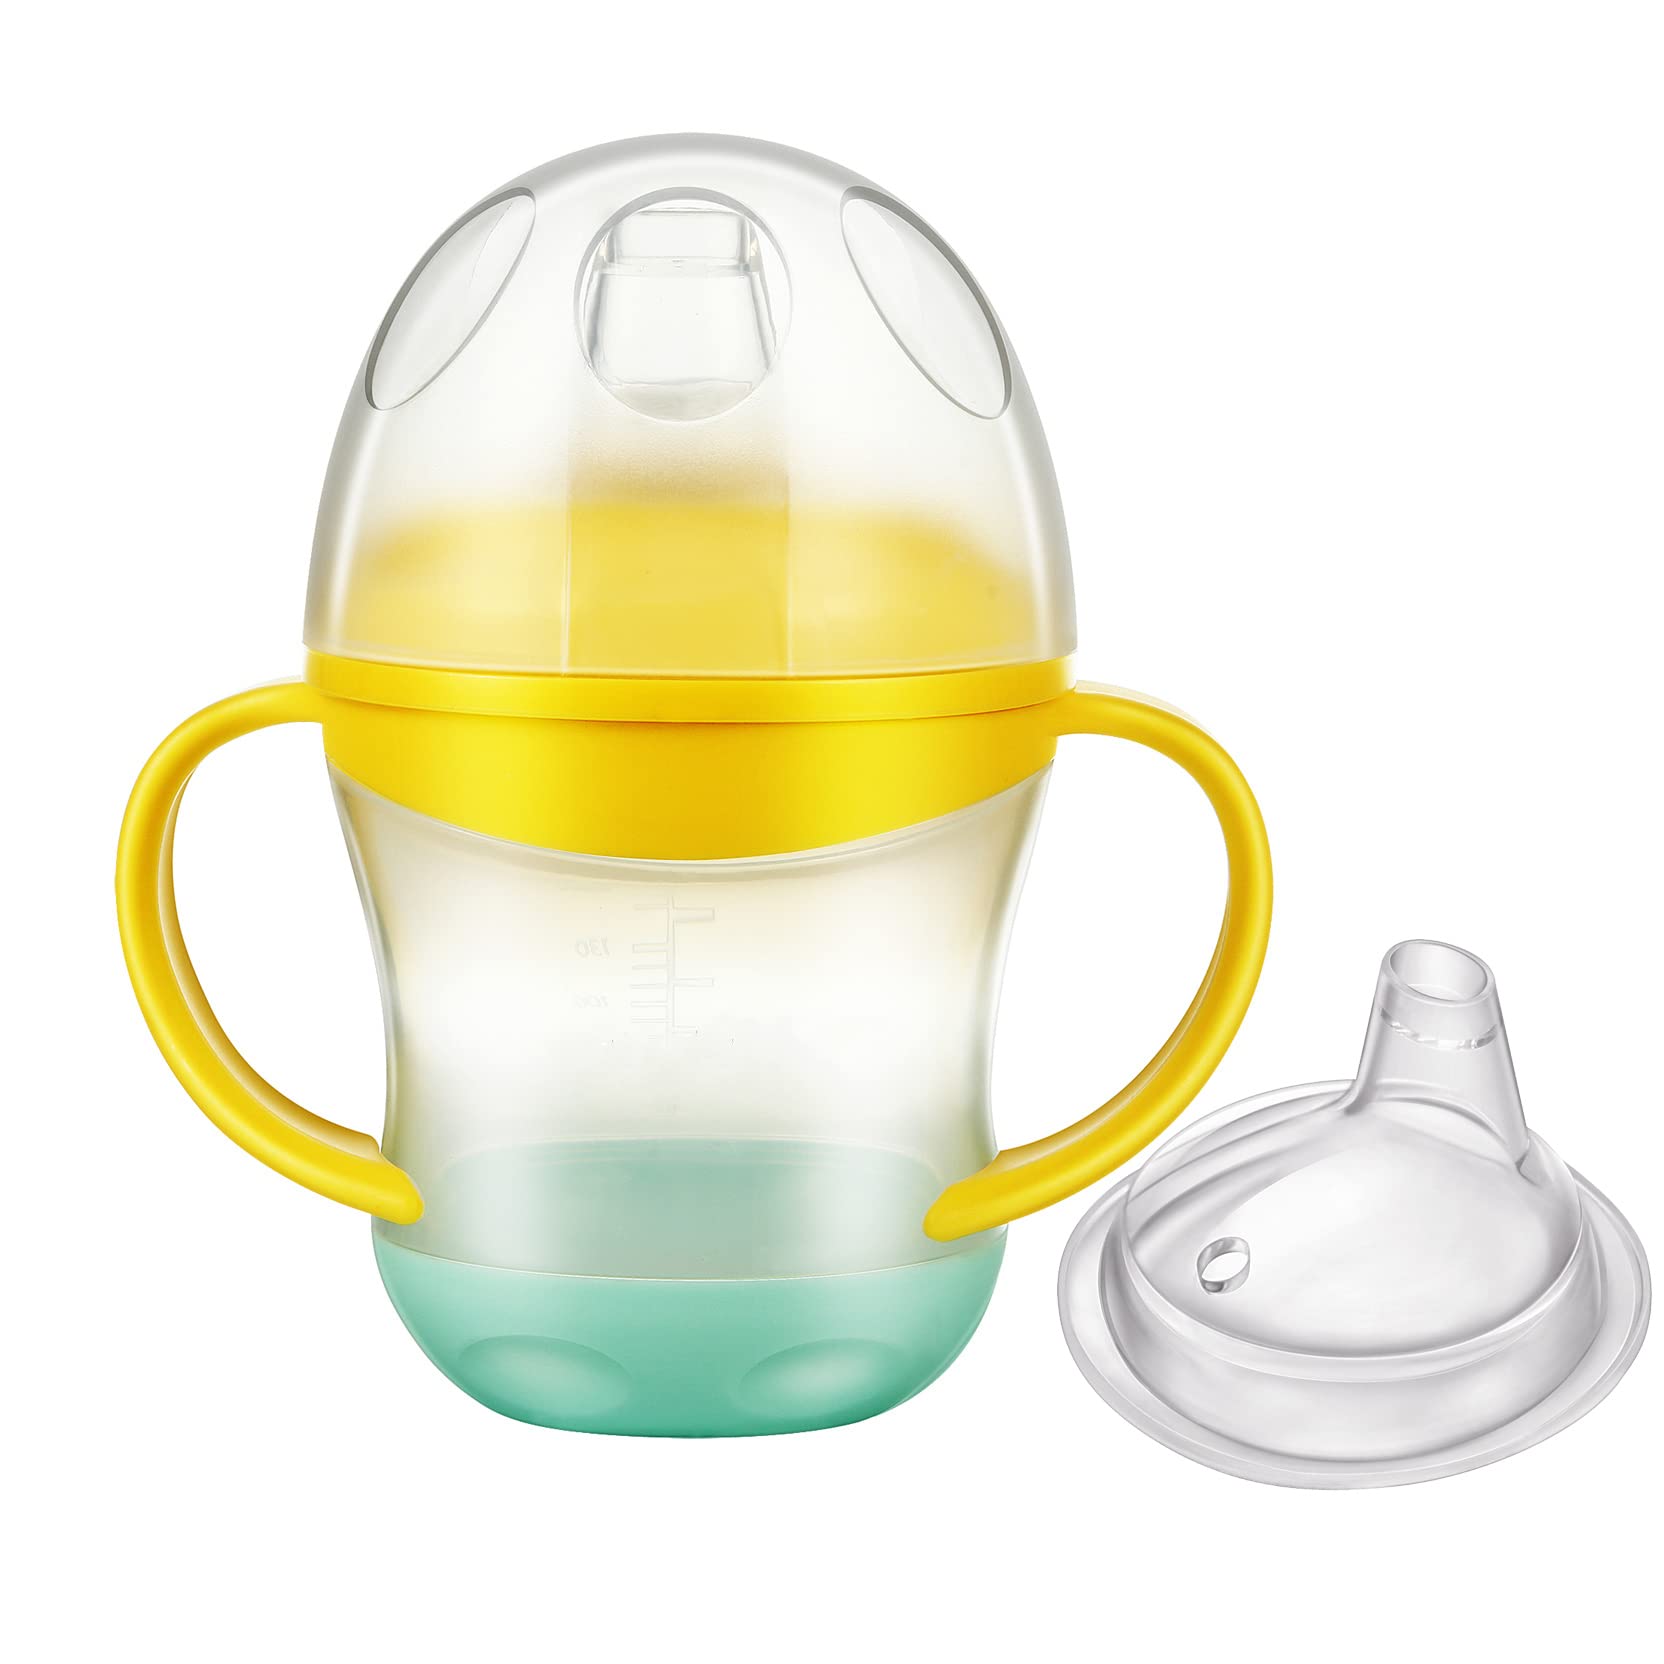 Toddler Sippy Cup With Straw Lid And Handles, Silicone Spill Proof